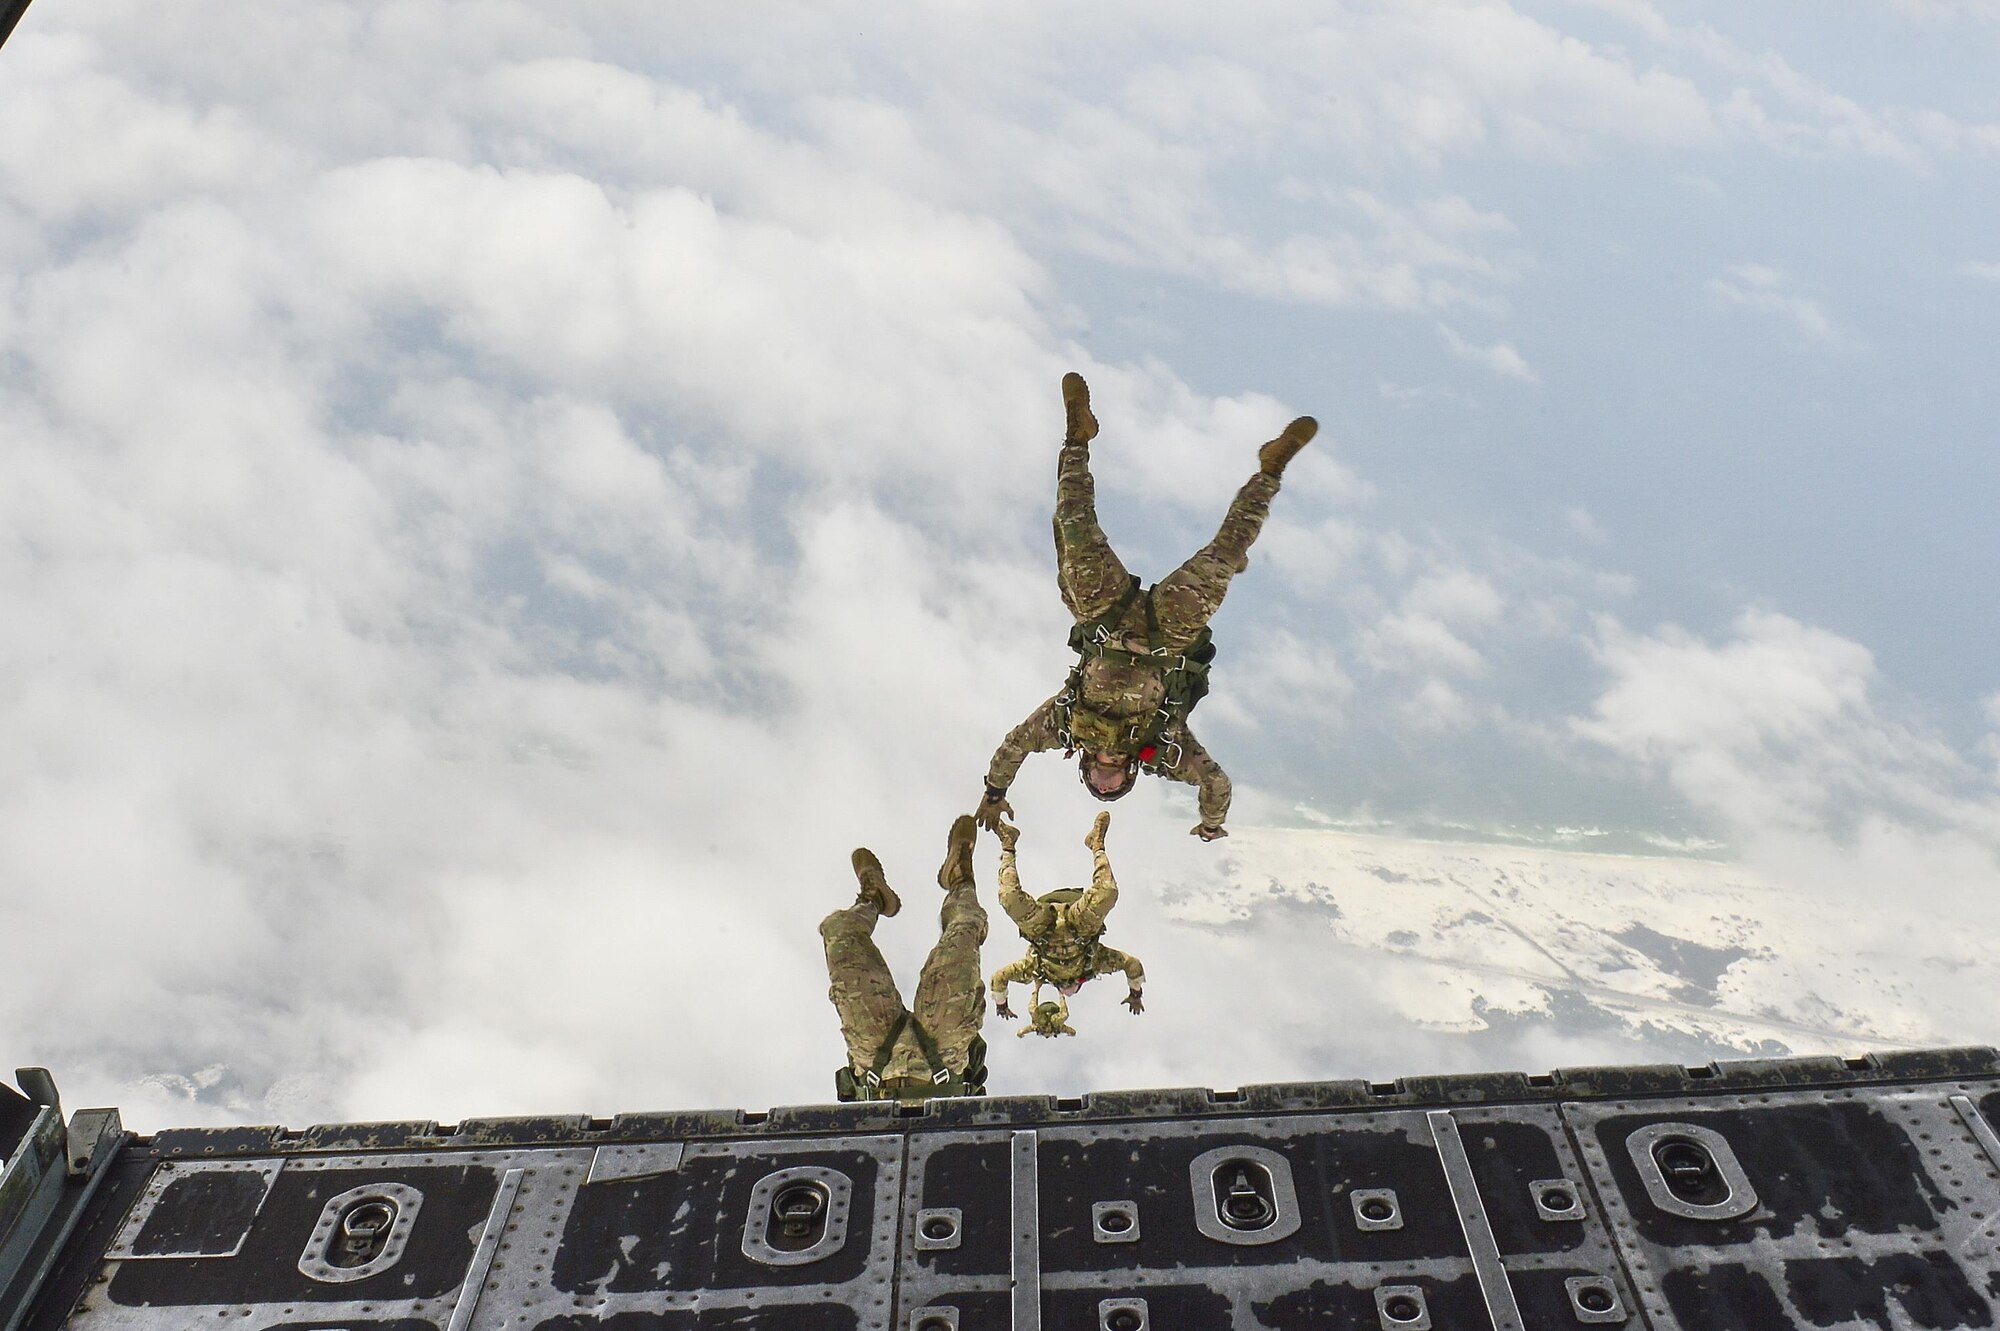 Members of the 7th Special Forces Group perform a High Altitude Low Opening jump from an MC-130P Combat Shadow over Hurlburt Field, Fla., May 15, 2015. The final two MC-130P Combat Shadow aircraft in the Air Force landed for the last time at Hurlburt Field, Fla., in front of more than 400 people and will take their last flight to the boneyard at Davis-Monthan Air Force Base, Arizona, June 1. (U.S. Air Force photo/Senior Airman Jeff Parkinson)